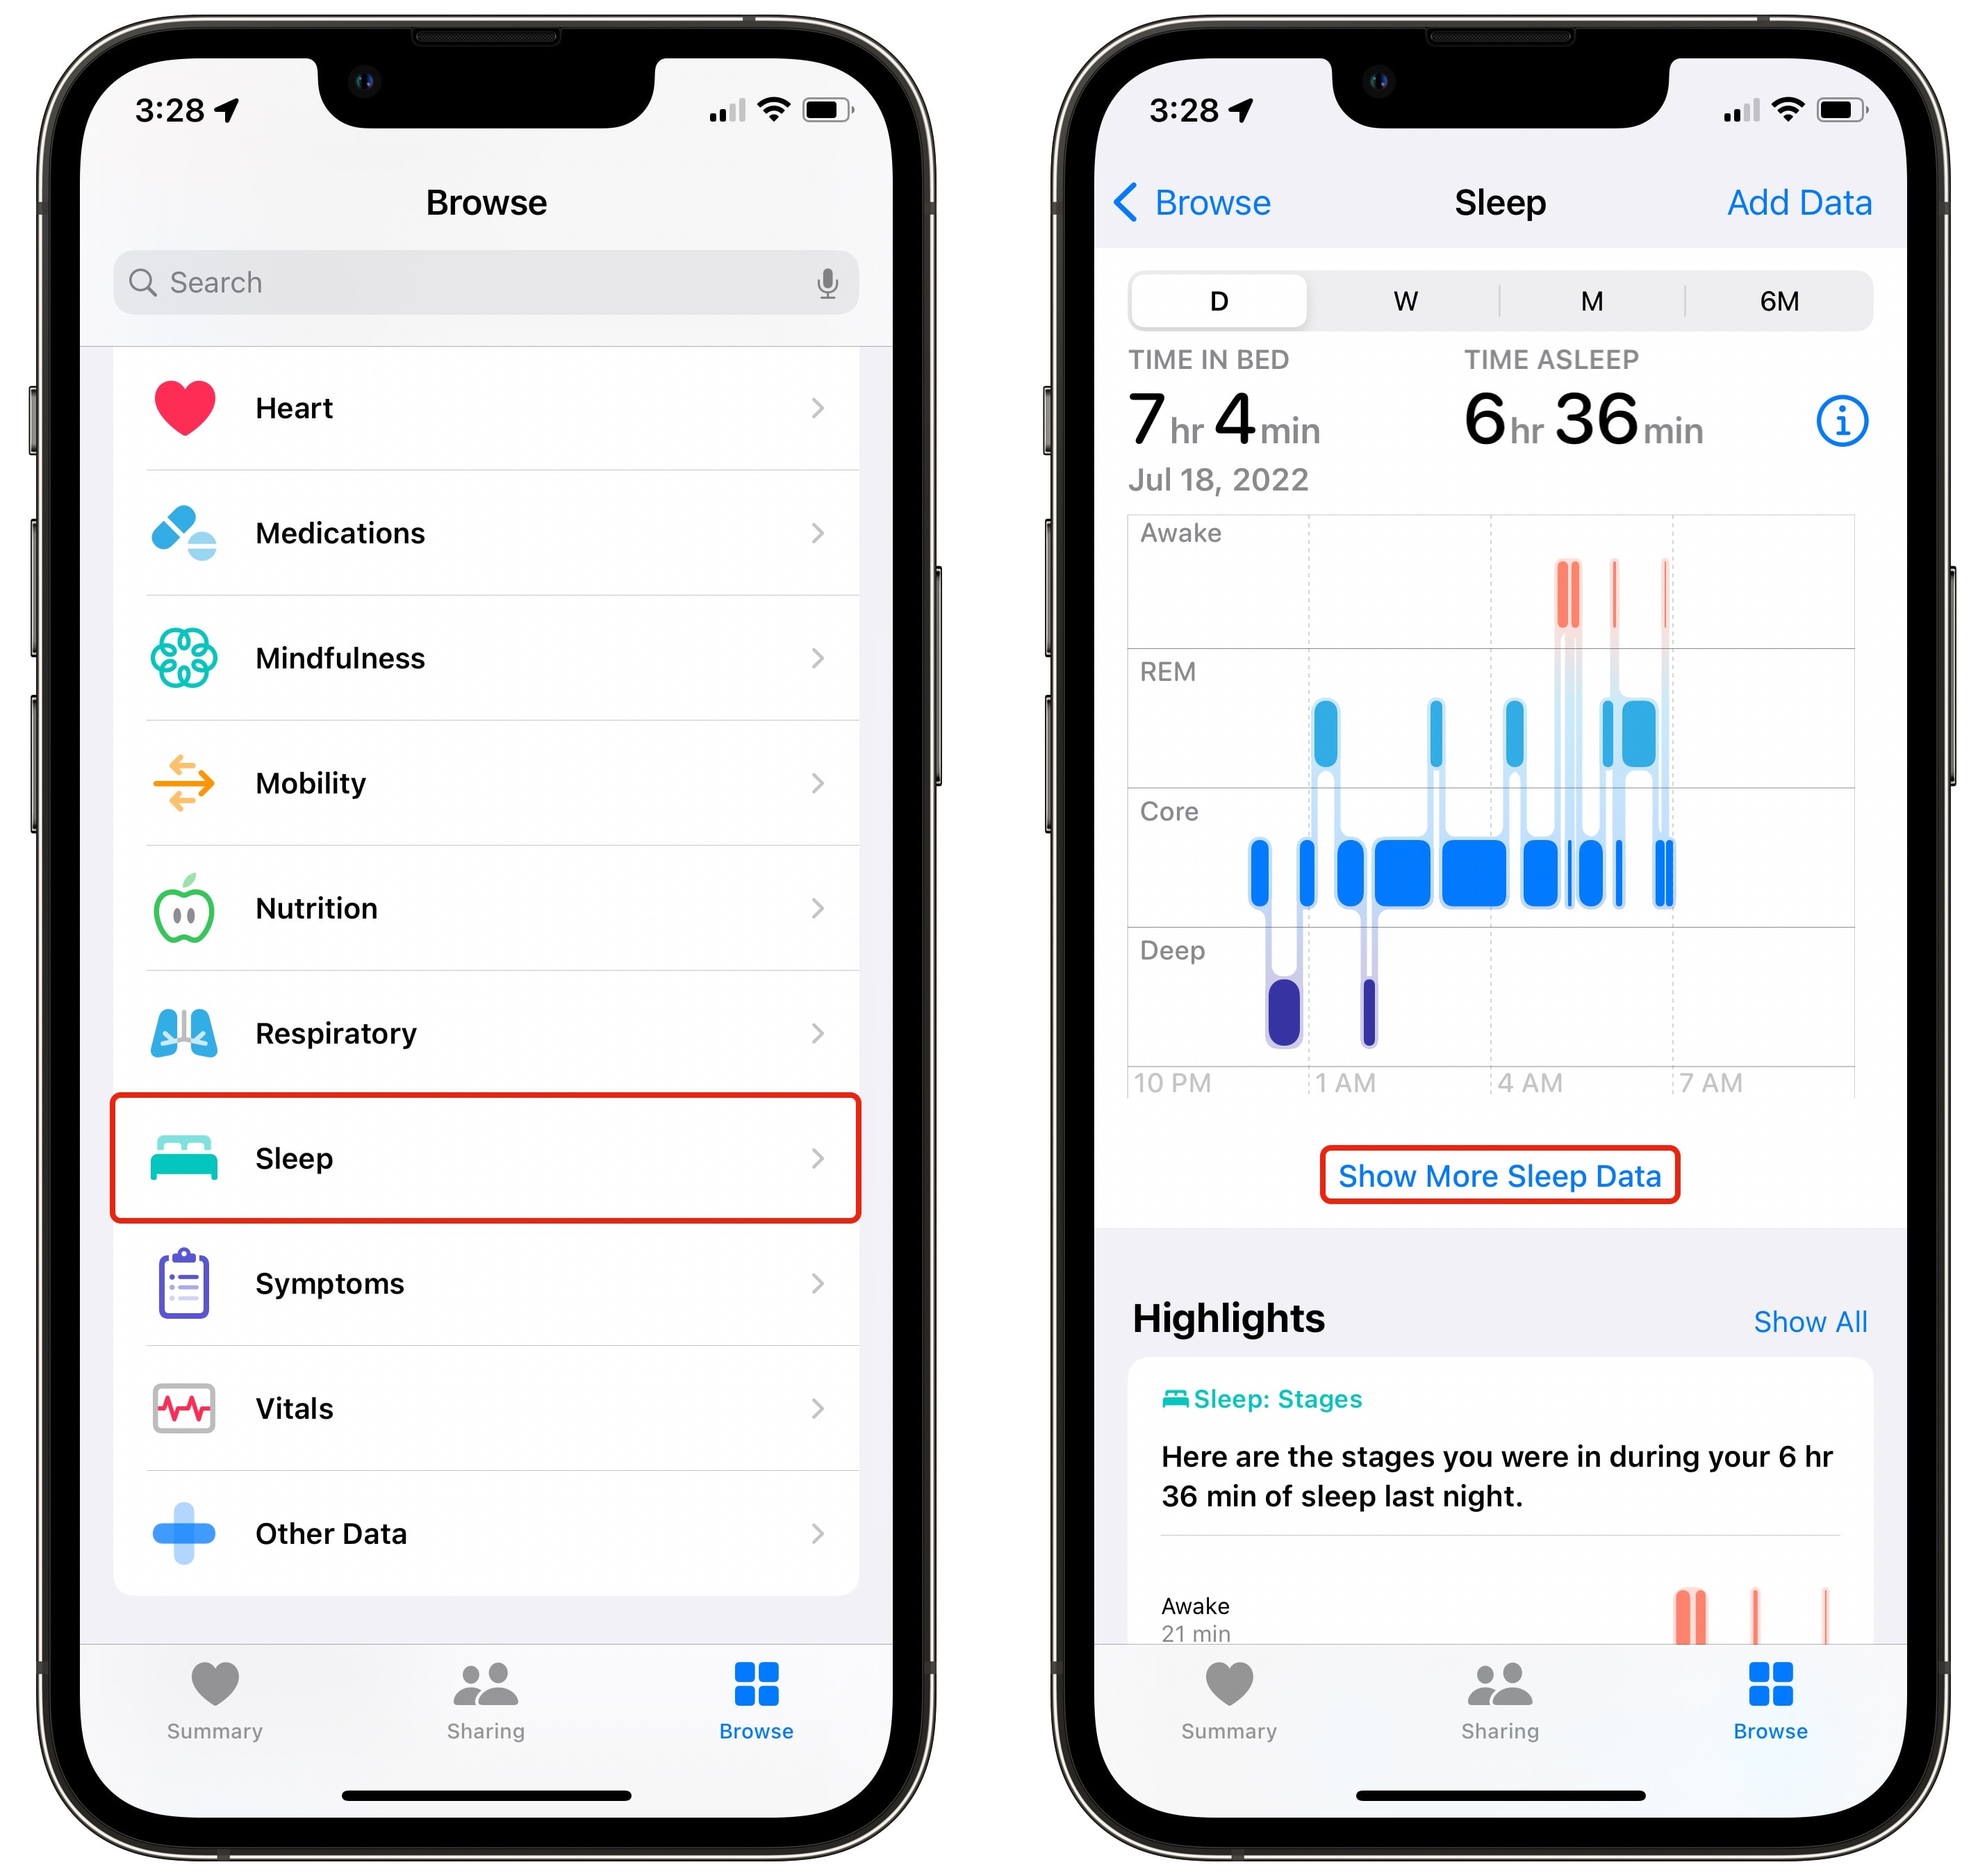 Find your sleep data in the Health app.